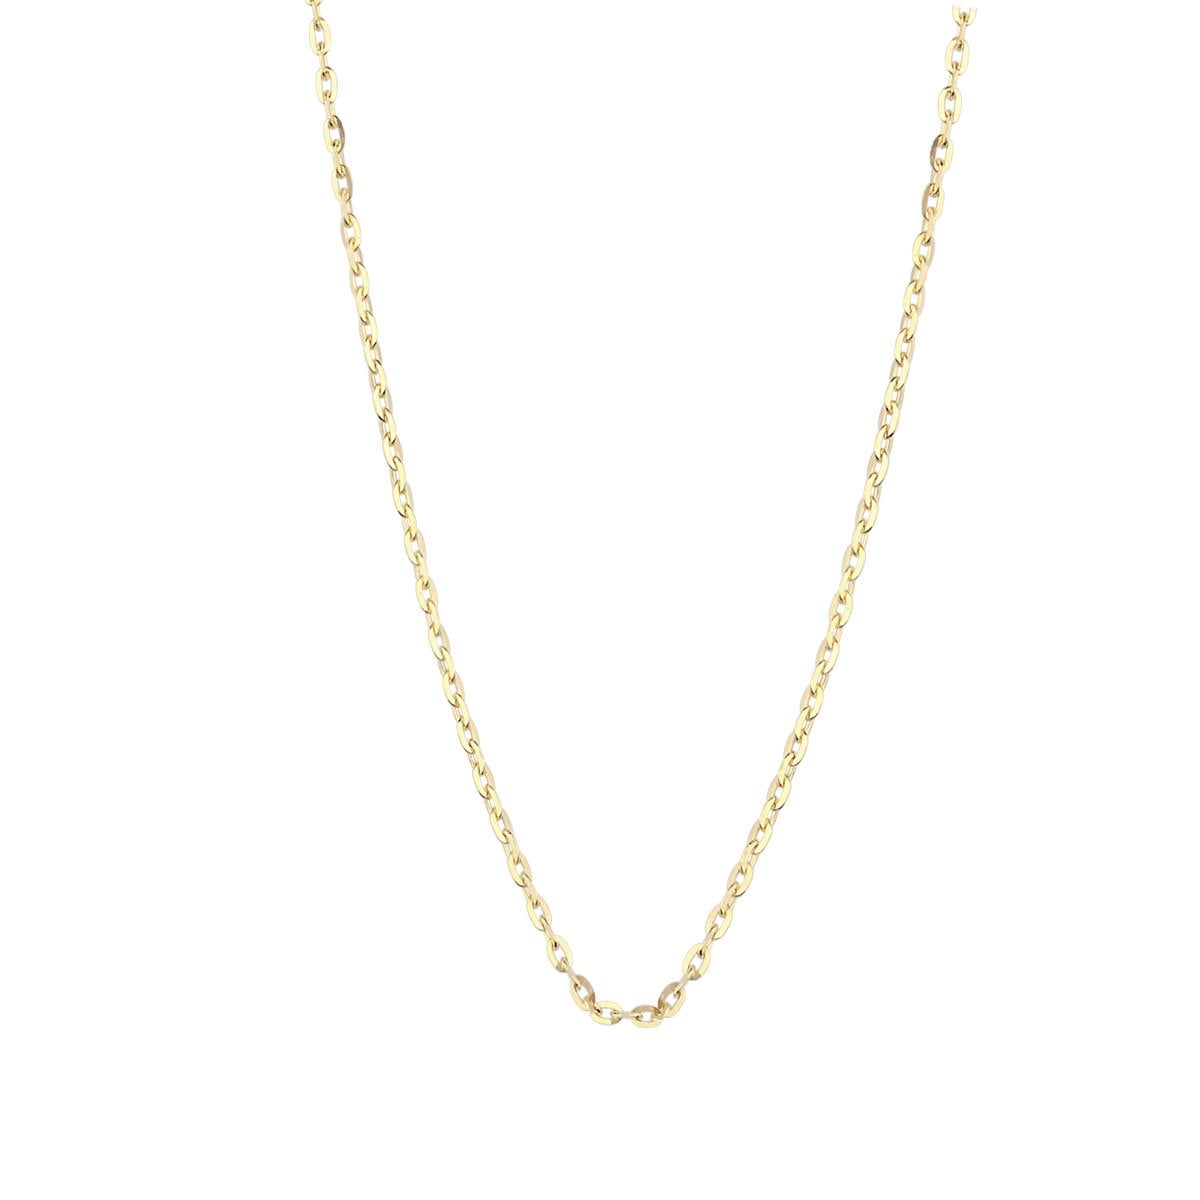 18ct Yellow Gold 16inch Trace Chain Necklace